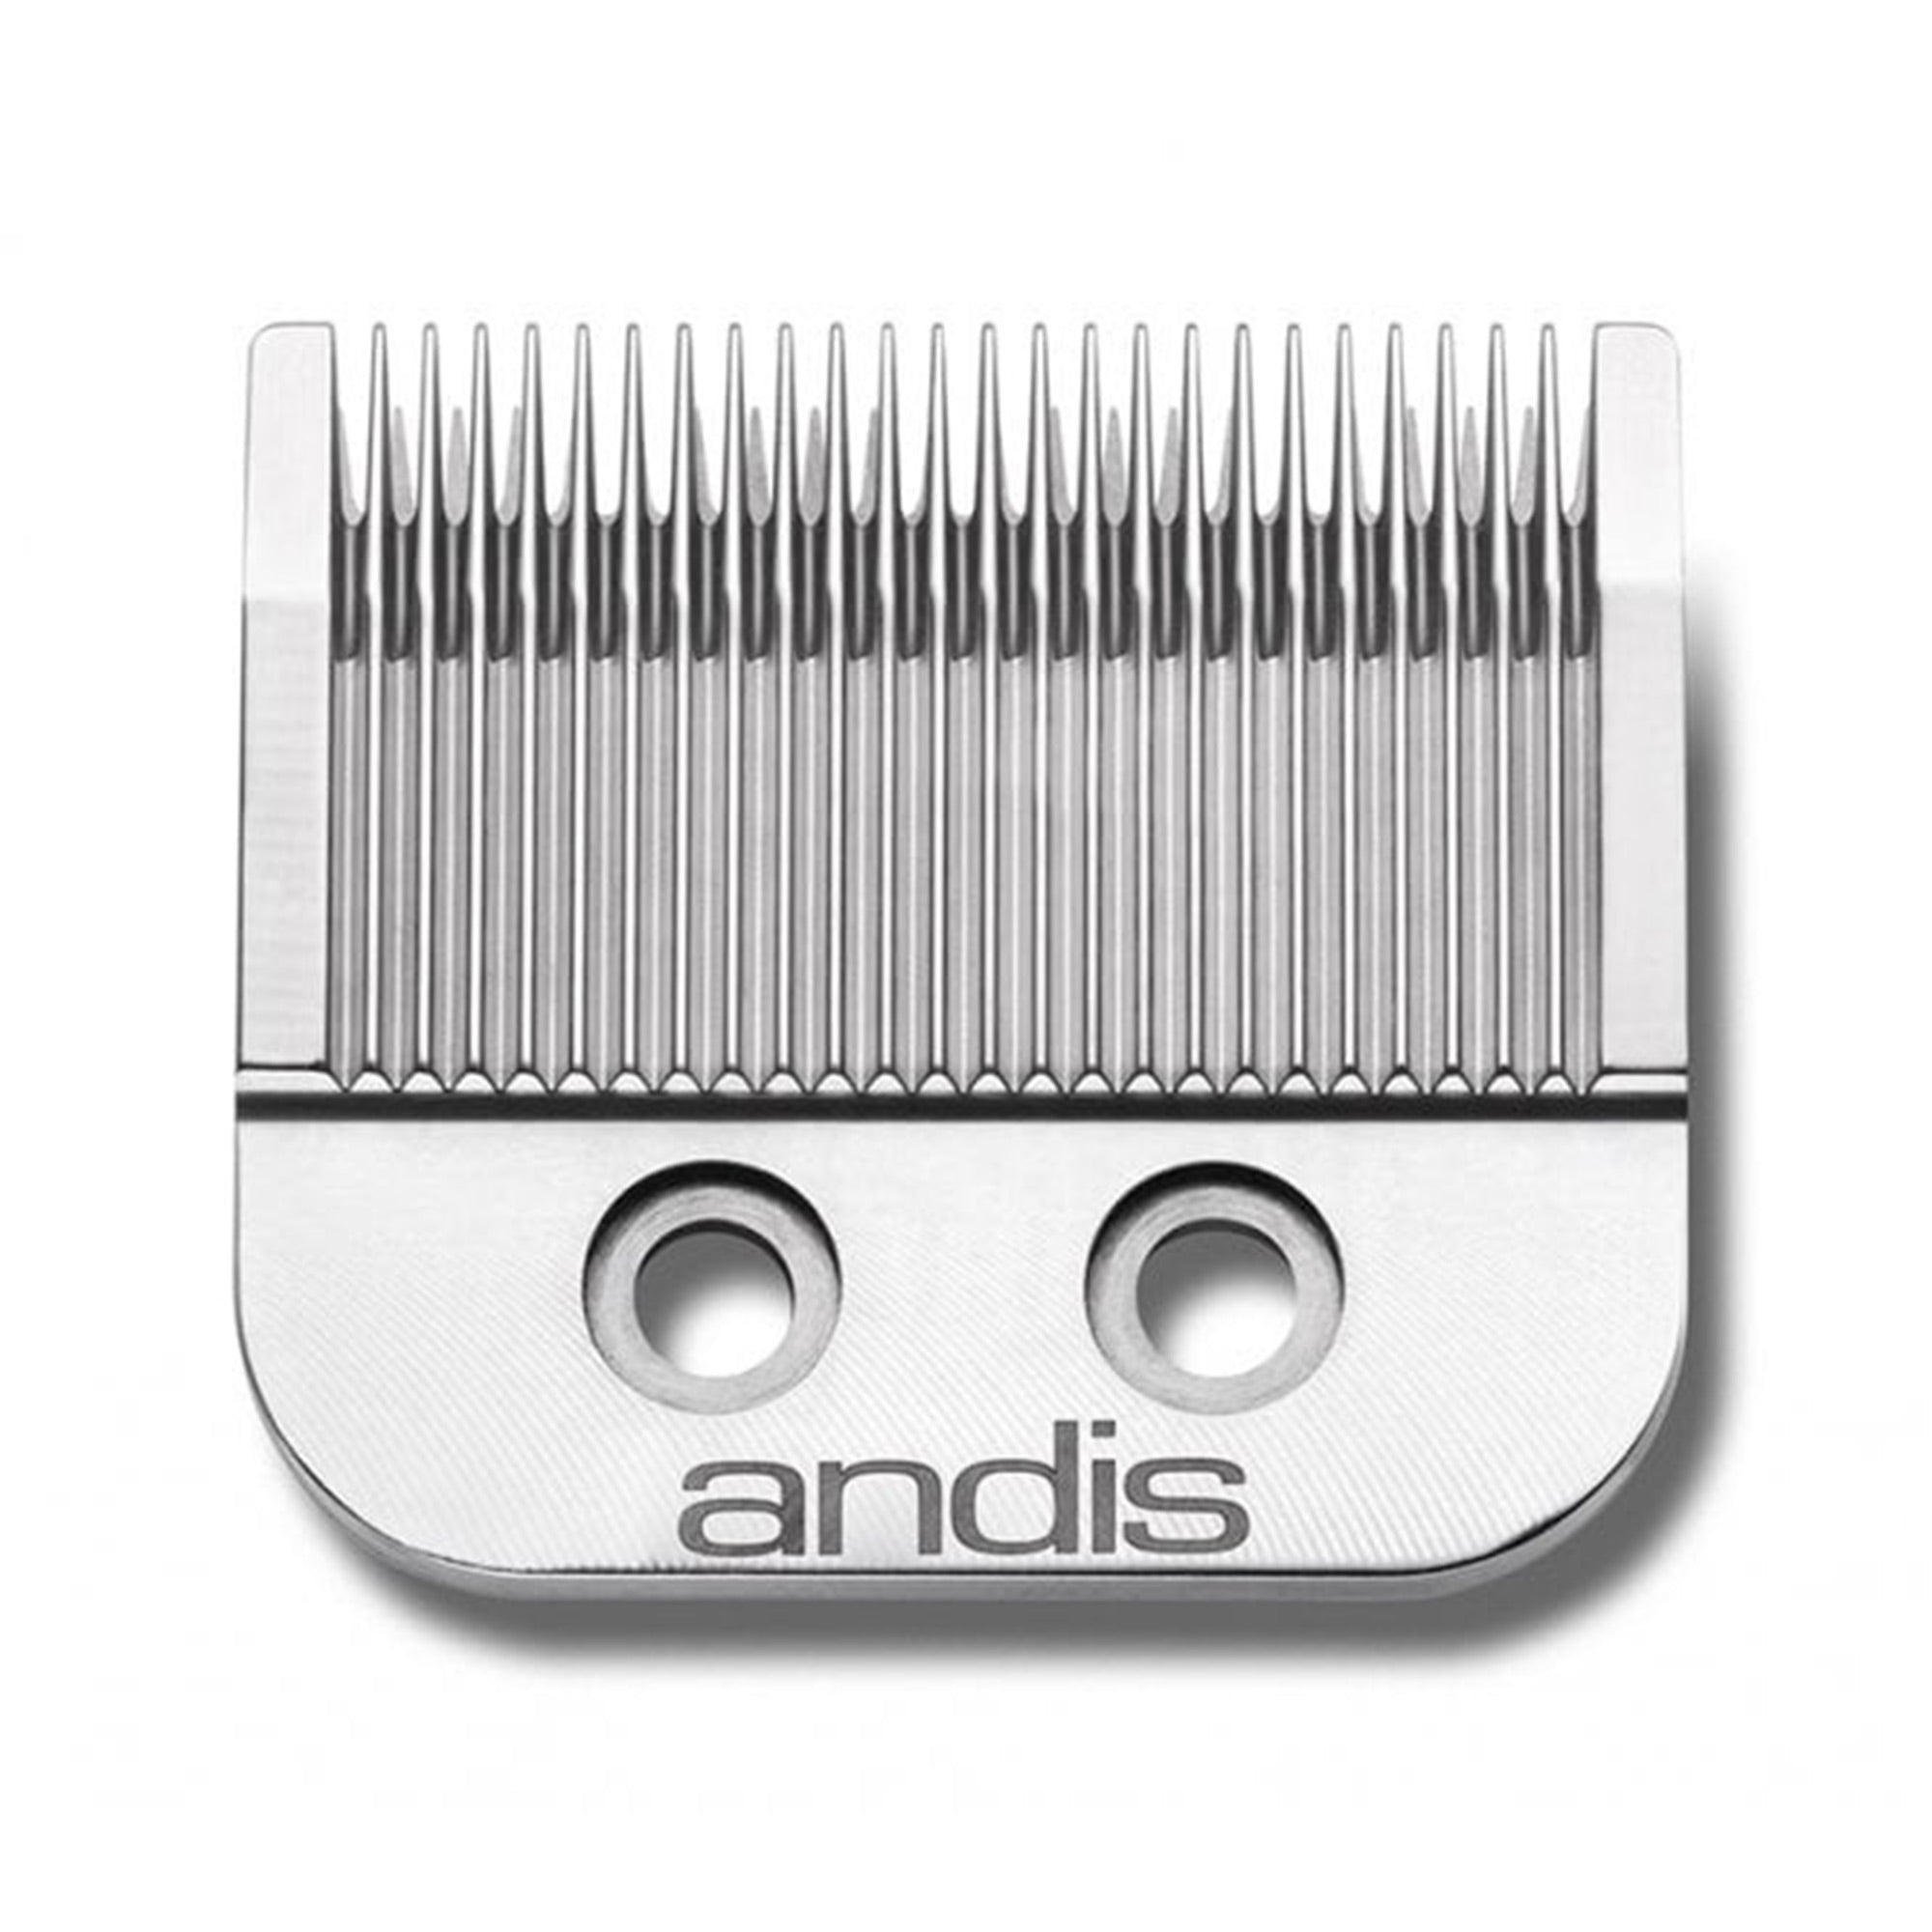 Andis - Master Cordless Li Replacement Blade #74080 - Eson Direct